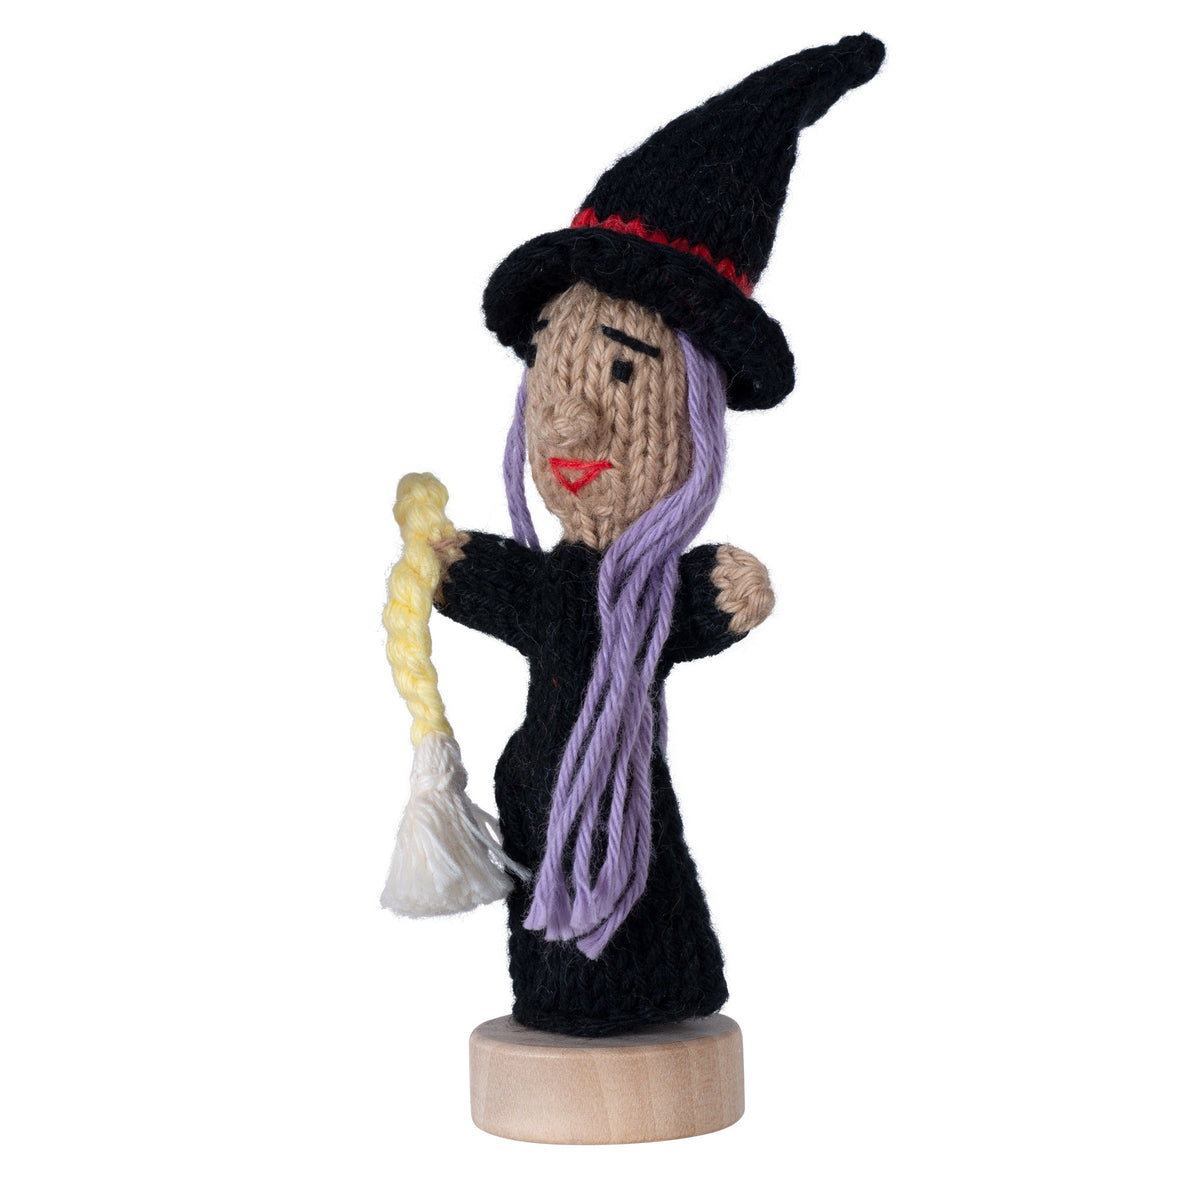 Witch - Bright Organic Cotton, Halloween Finger Puppet